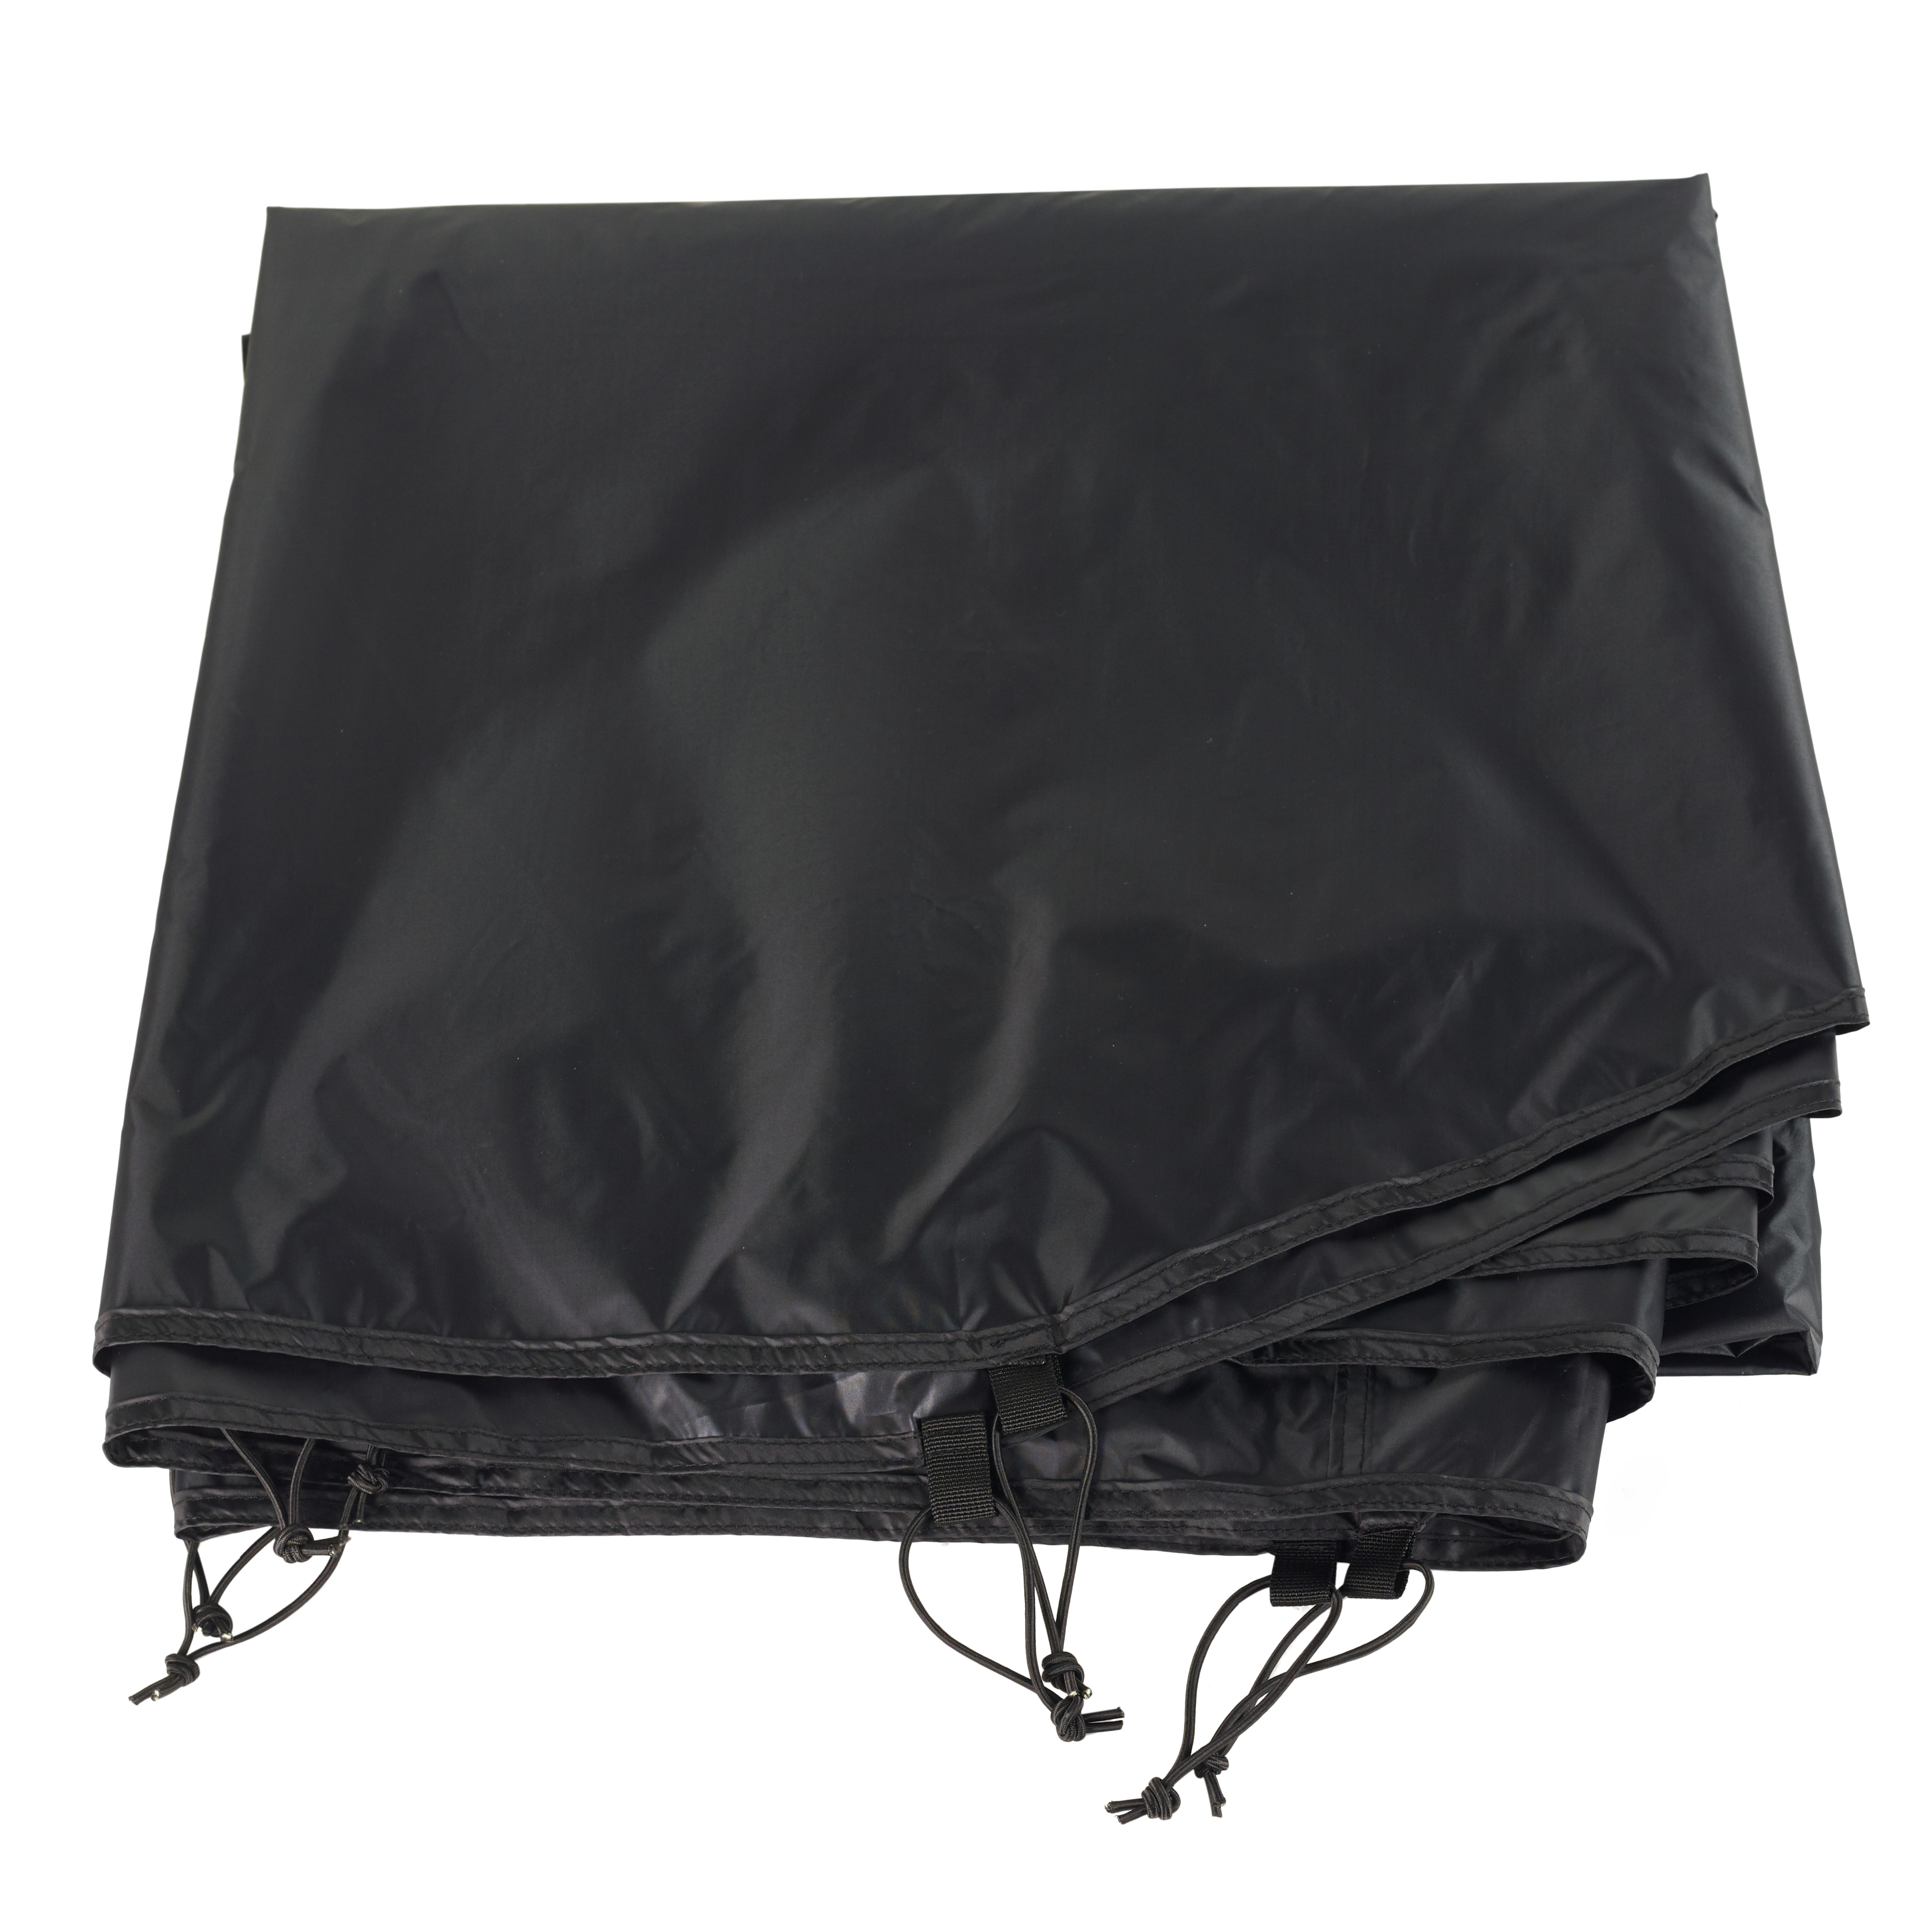 Footprint 2-Person Dome Tent G3 Black